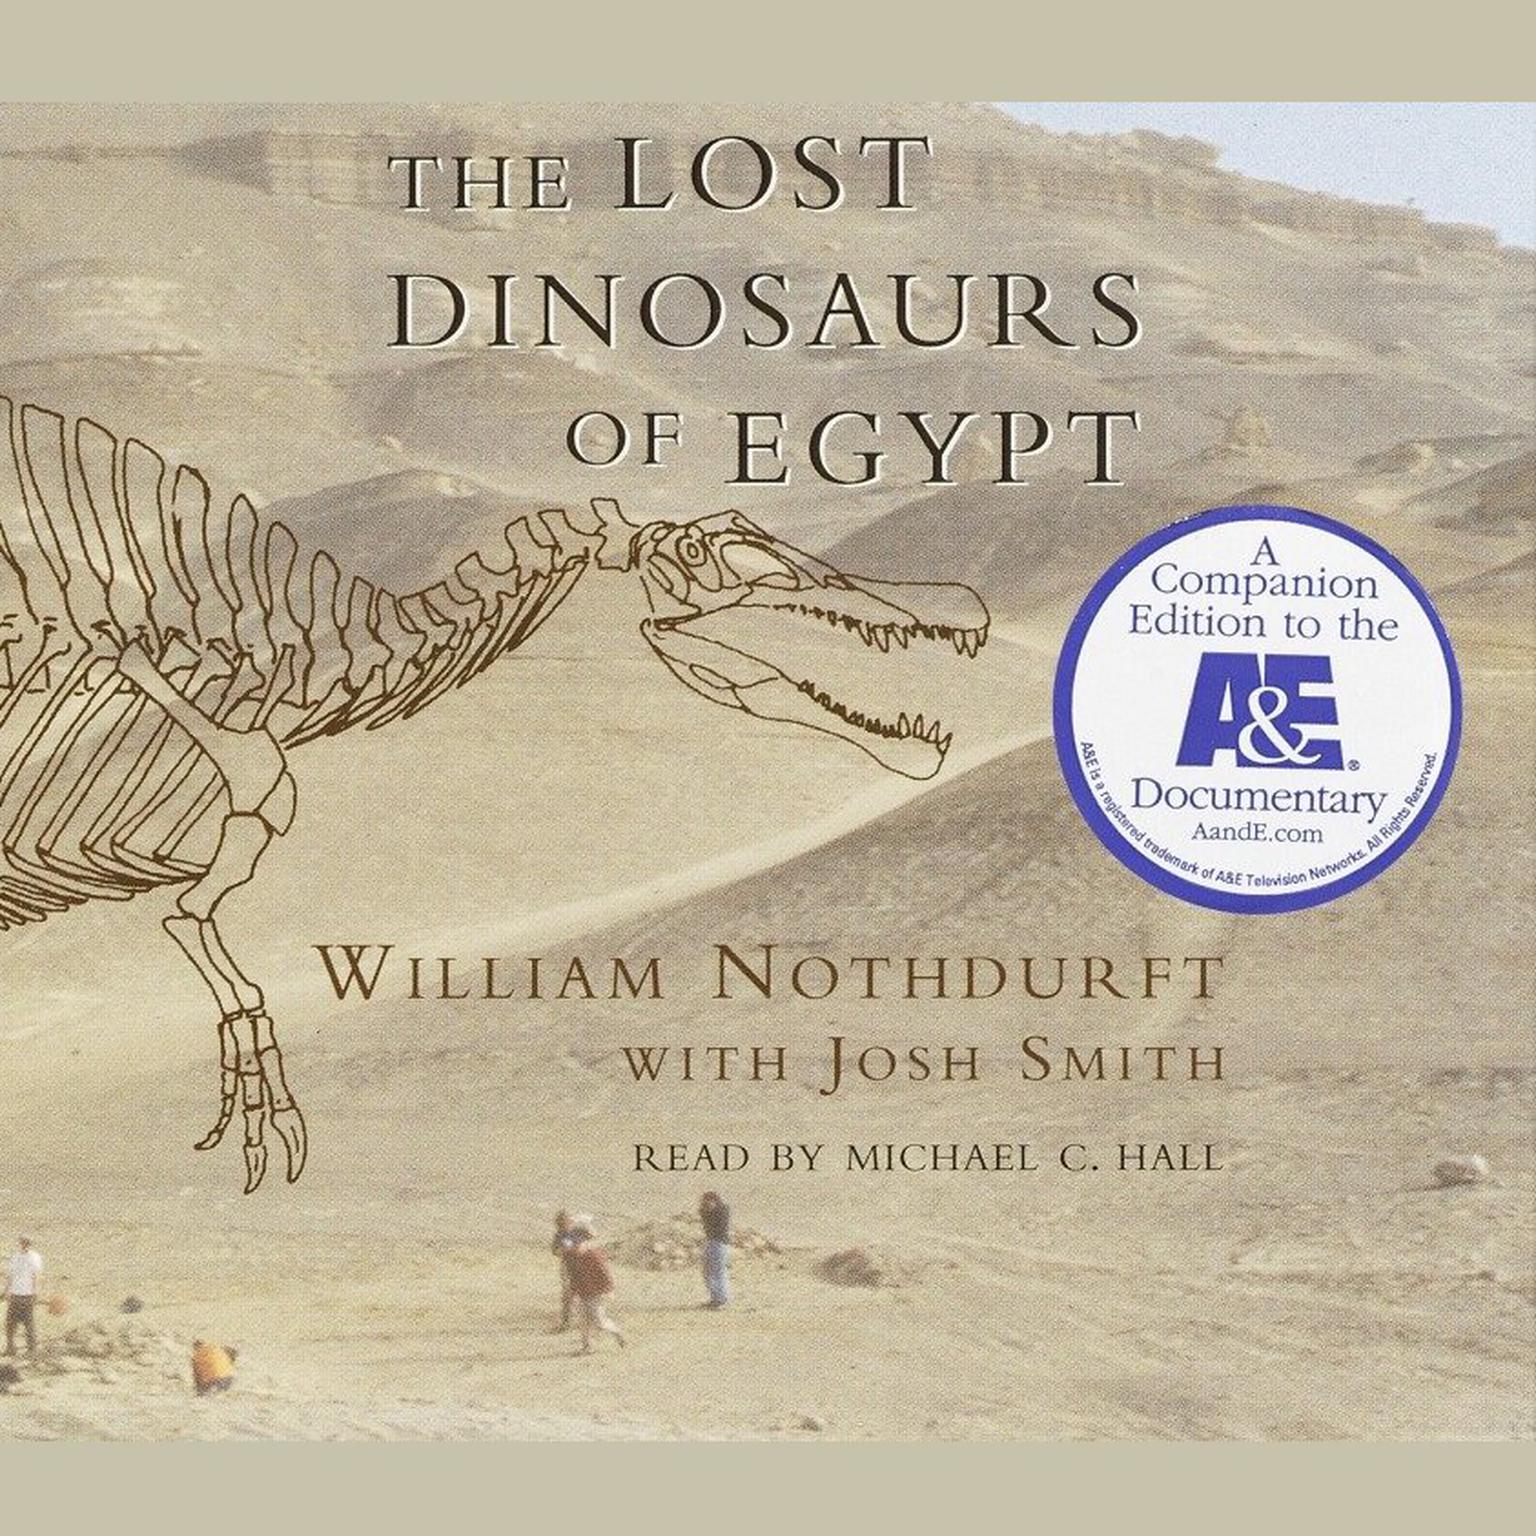 The Lost Dinosaurs of Egypt (Abridged) Audiobook, by William Nothdurft